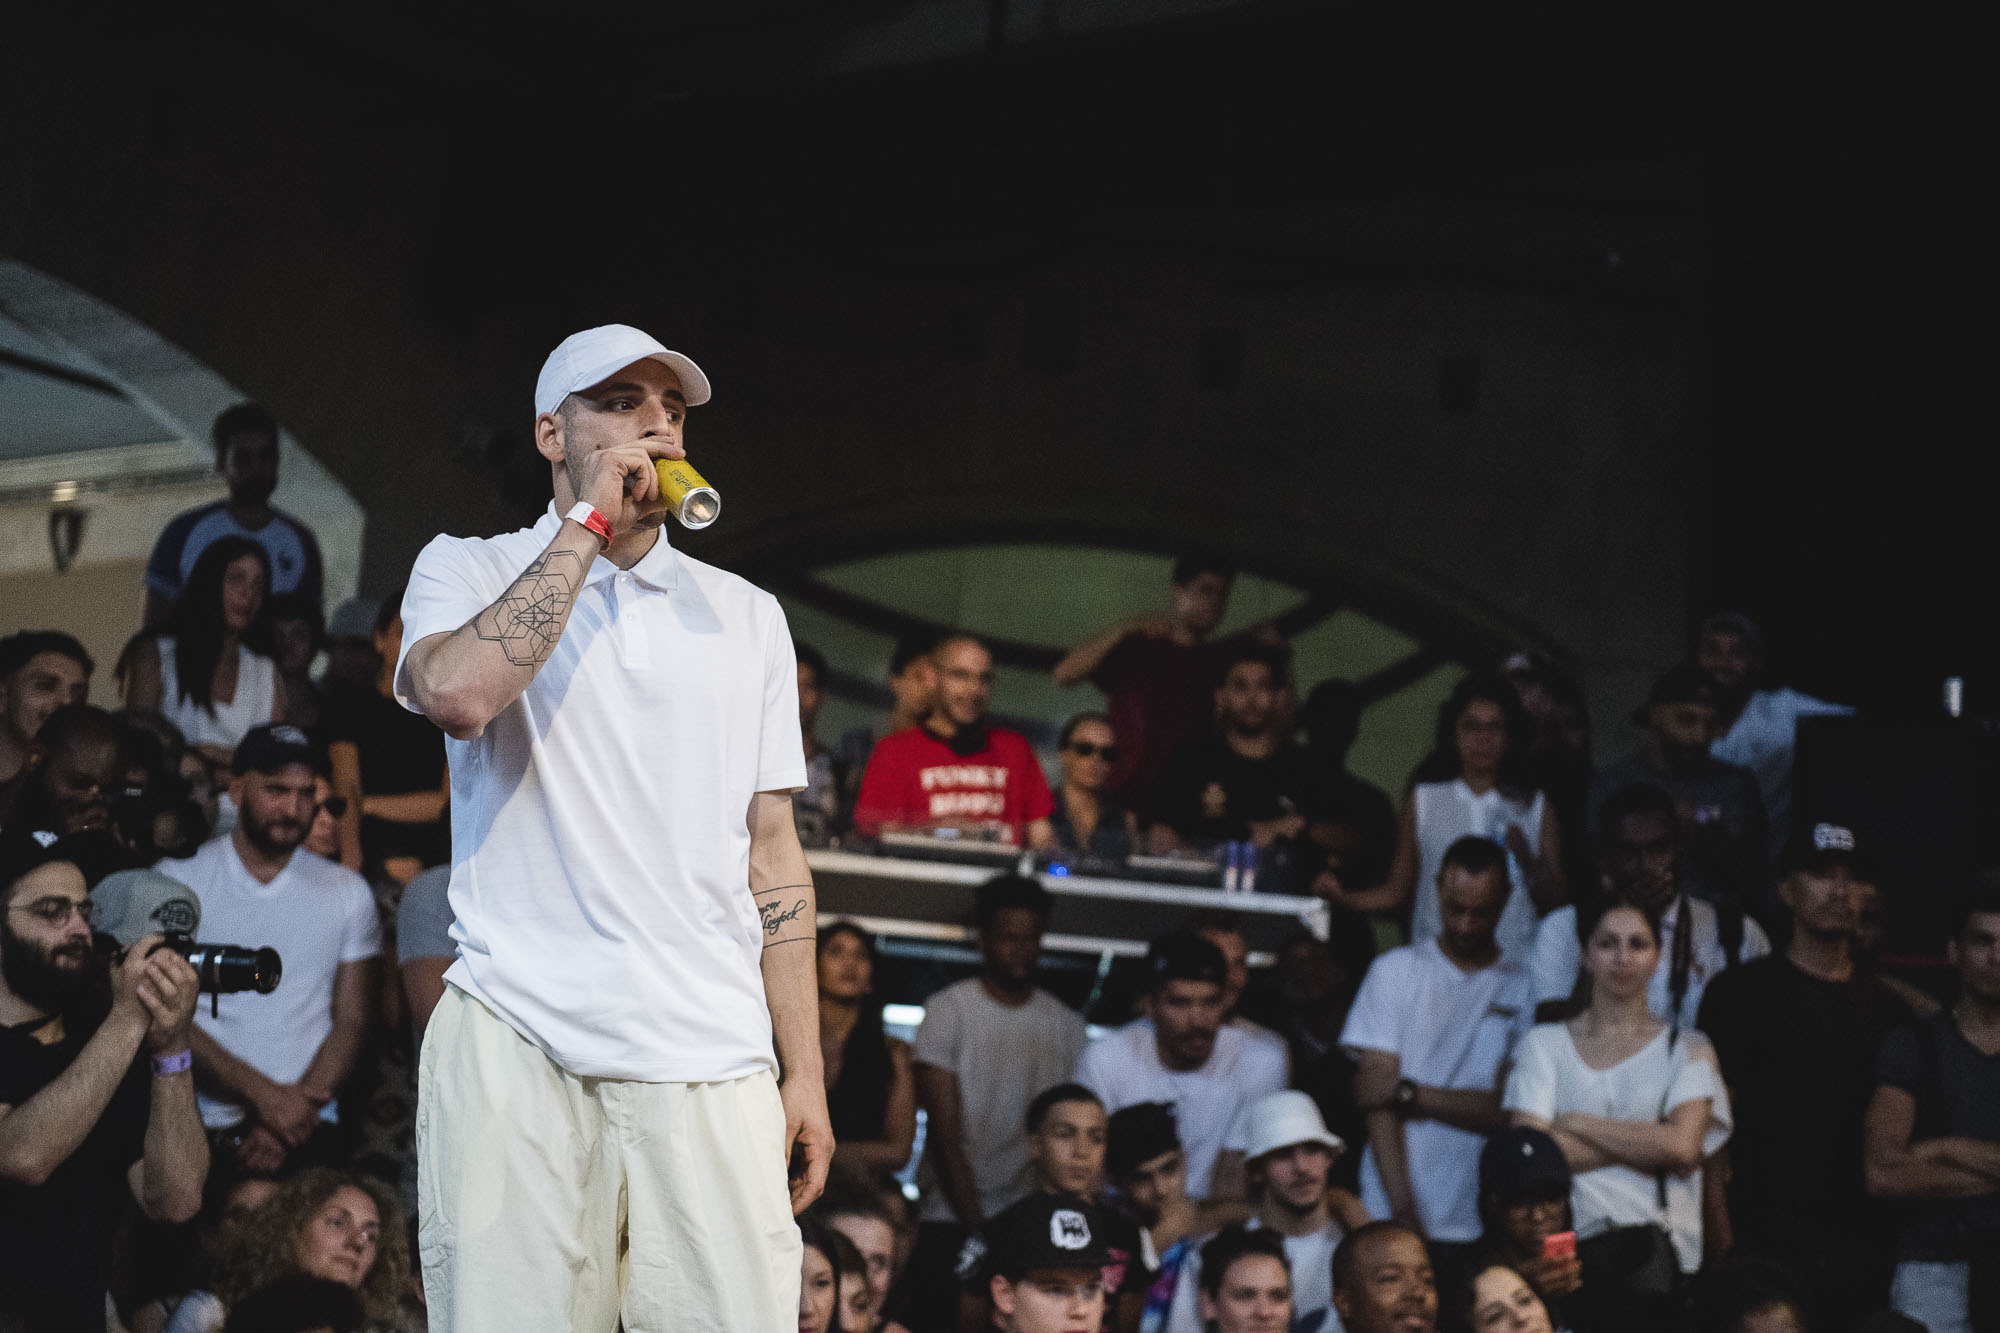 Fenix Just Before the quarter final at the WIP Villette during the Red Bull BC One France Cypher Final in Paris, France on July 10th 2016.